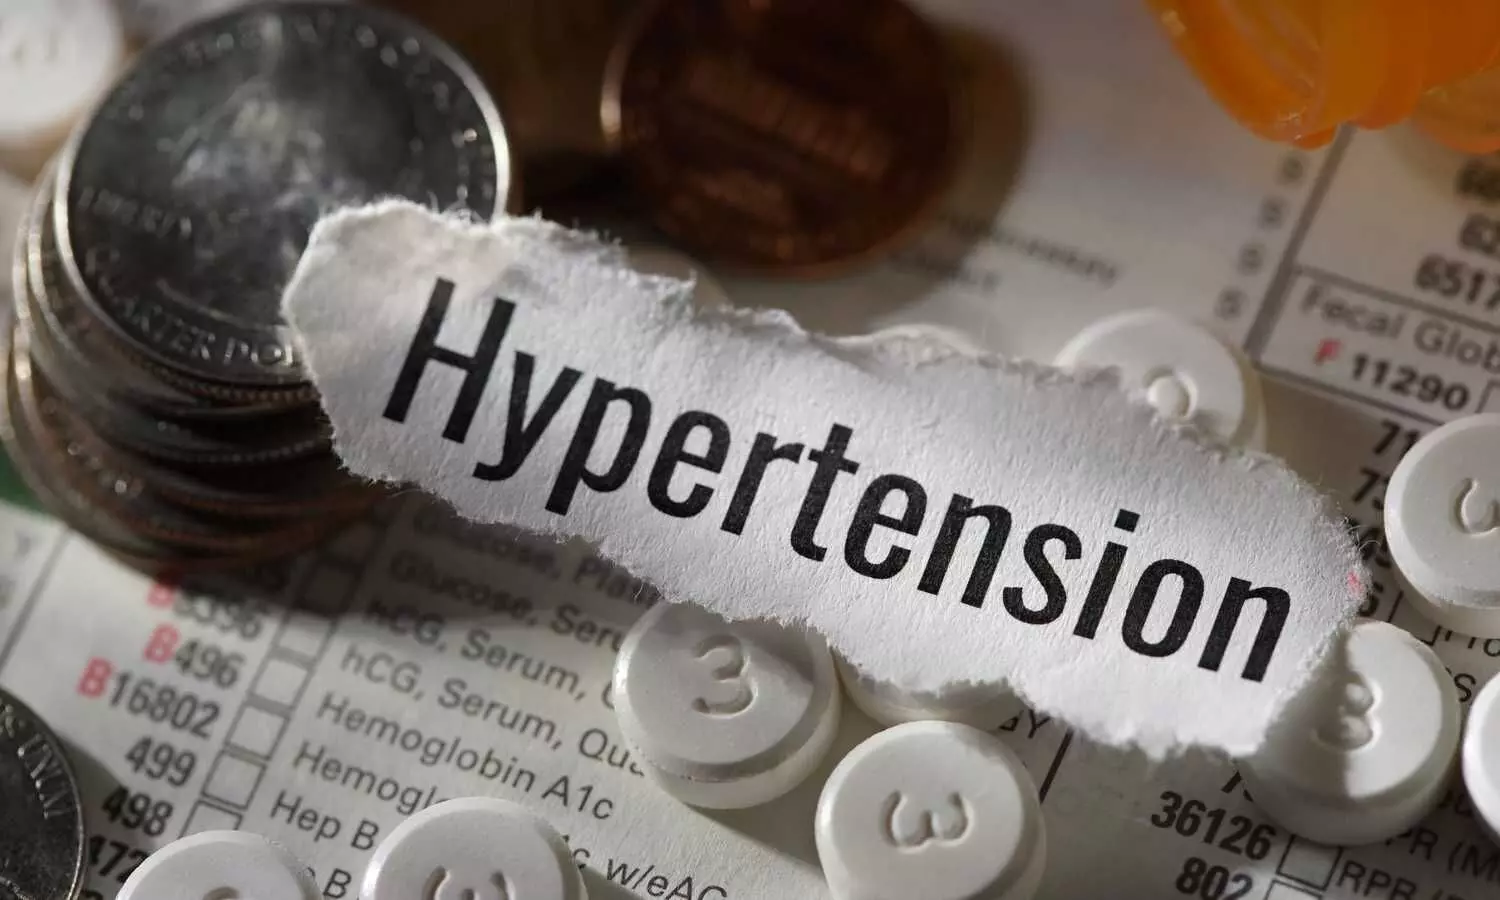 Hypertension or high blood pressure has recently become increasingly prevalent among children for premature death  at Global Level: Experts